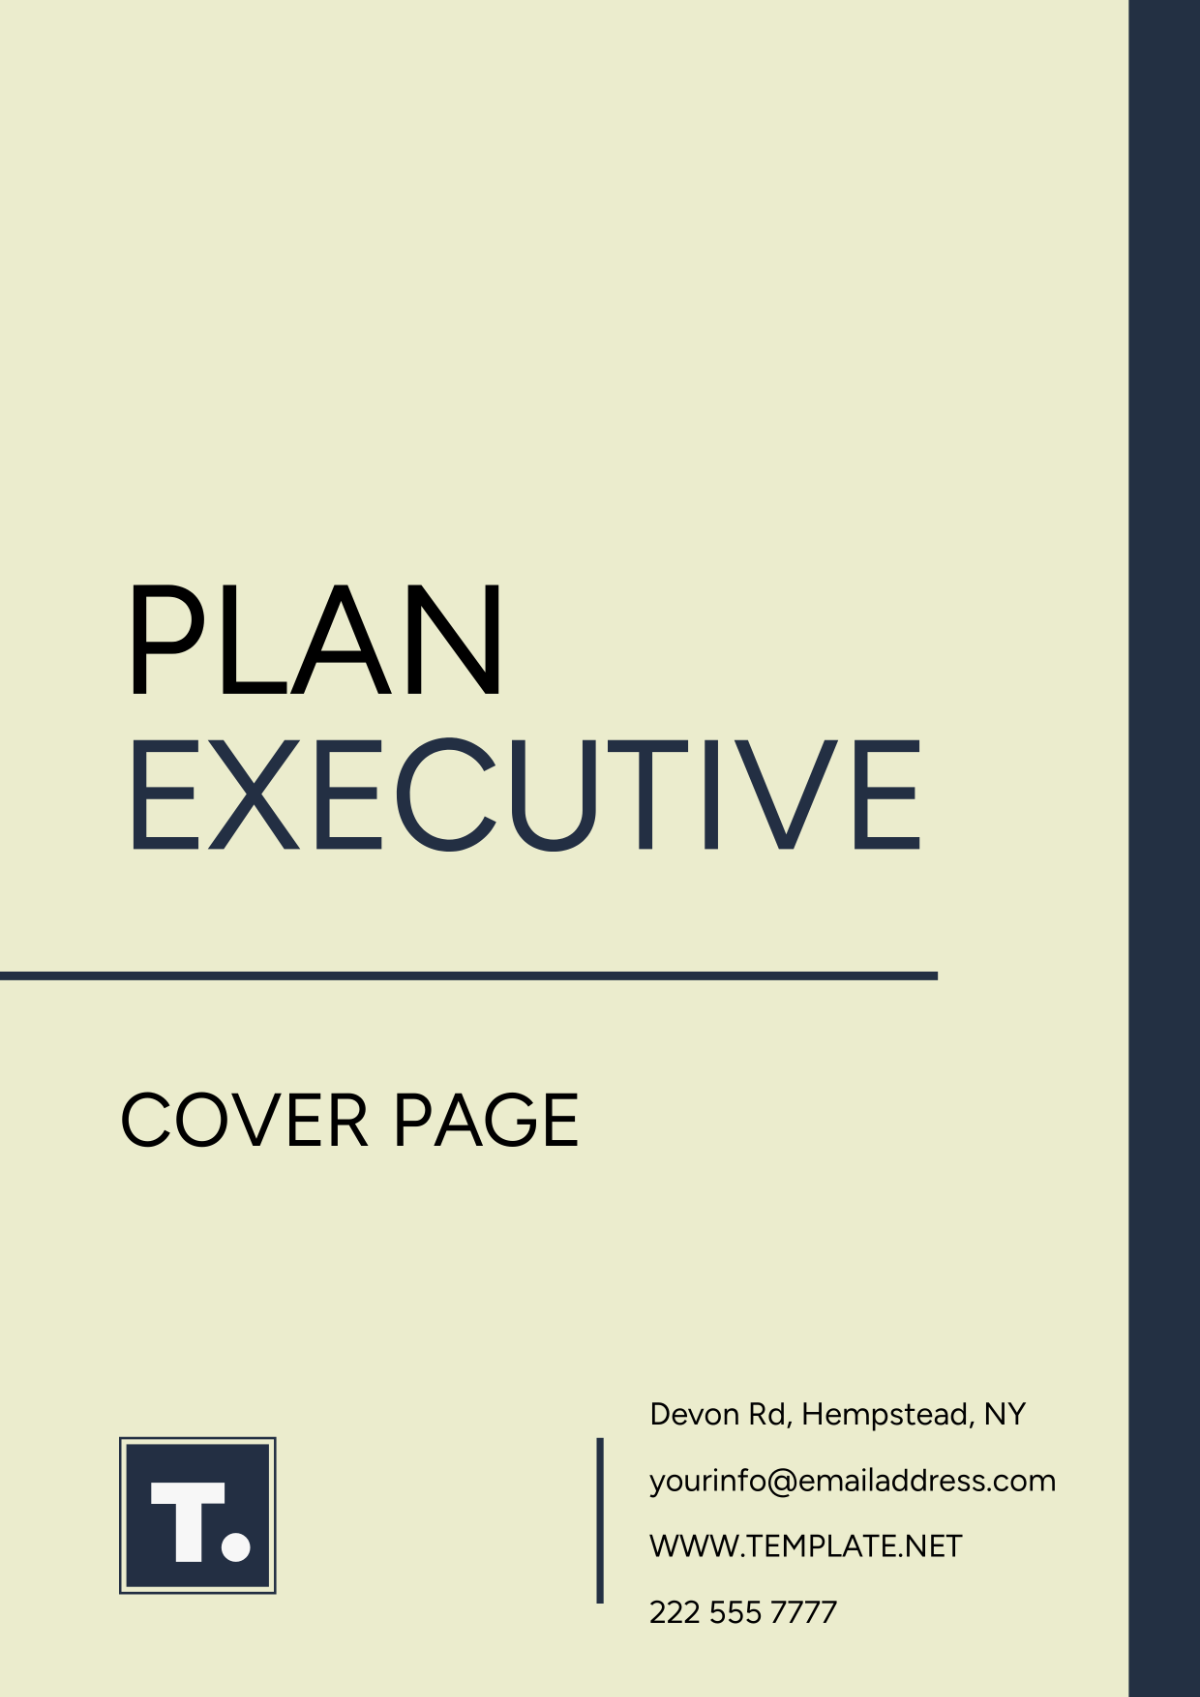 Plan Executive Cover Page